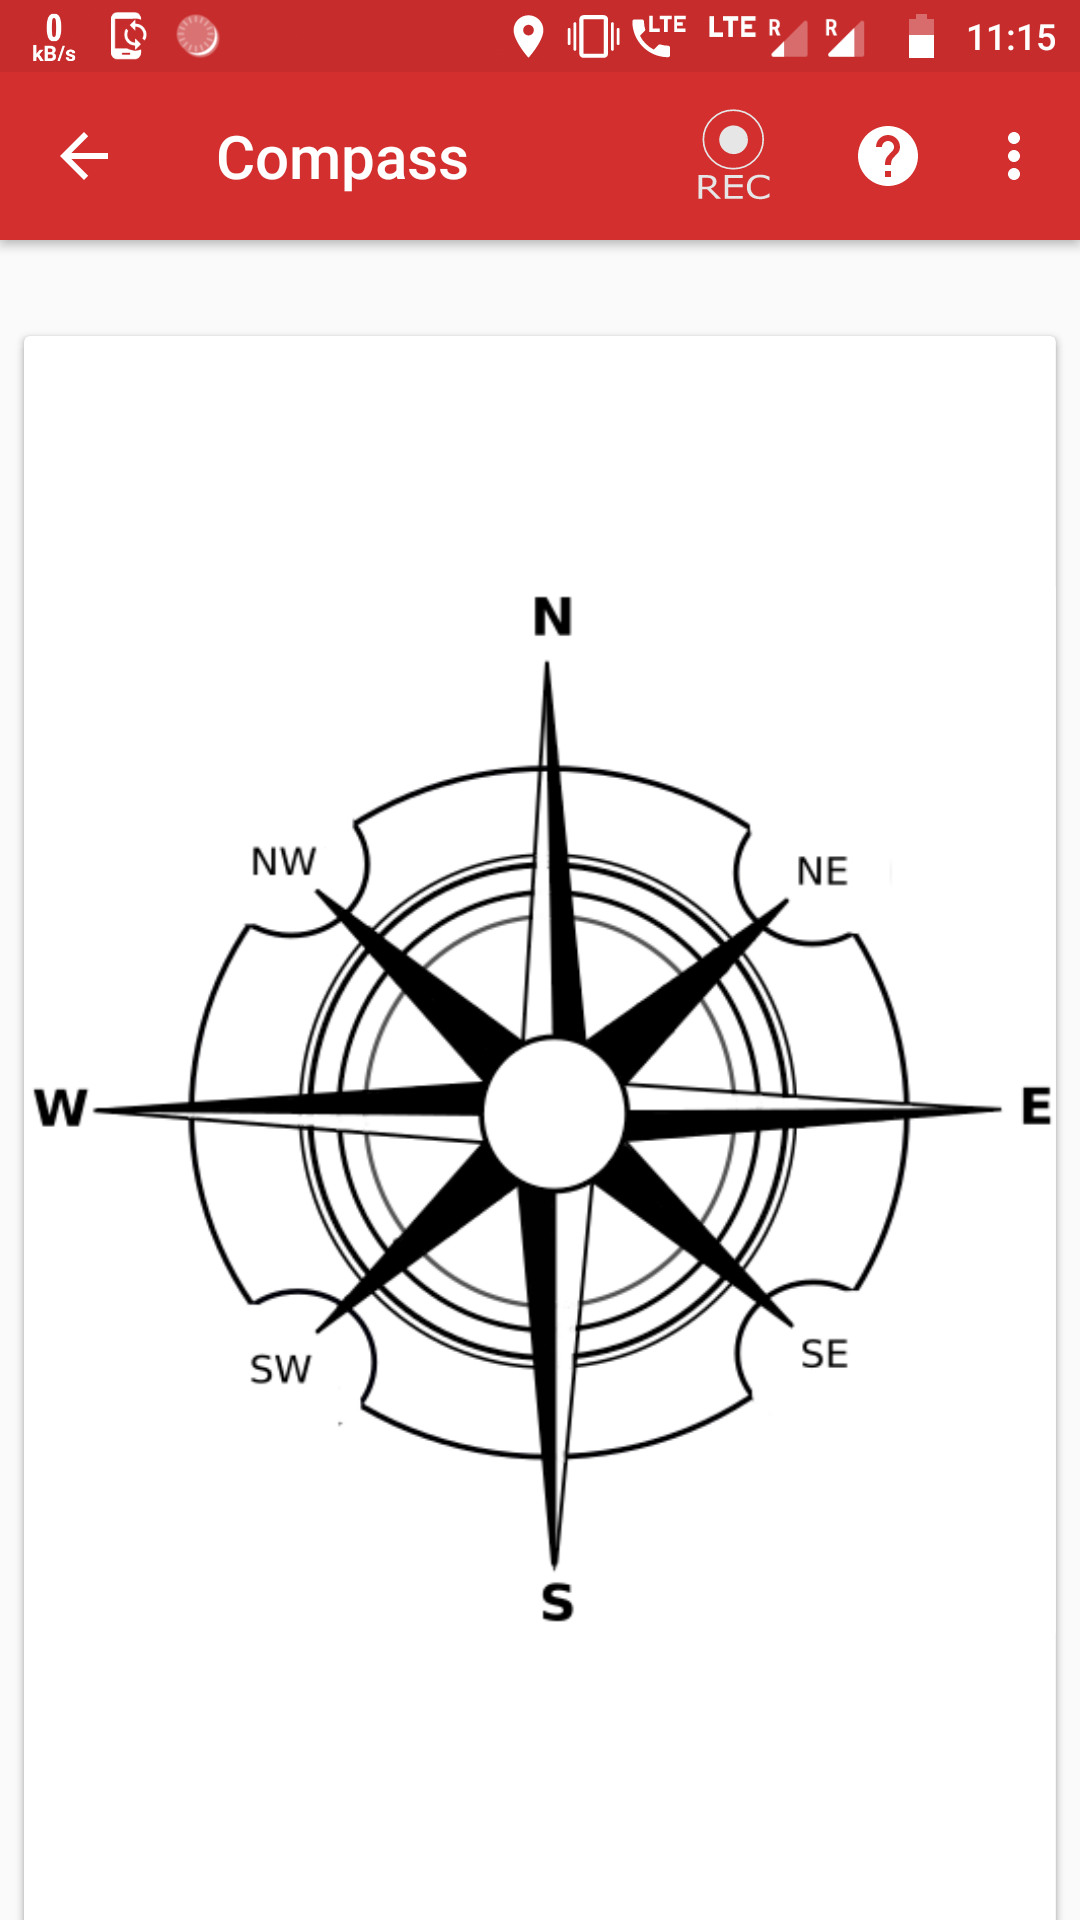 instrument_compass_view.png